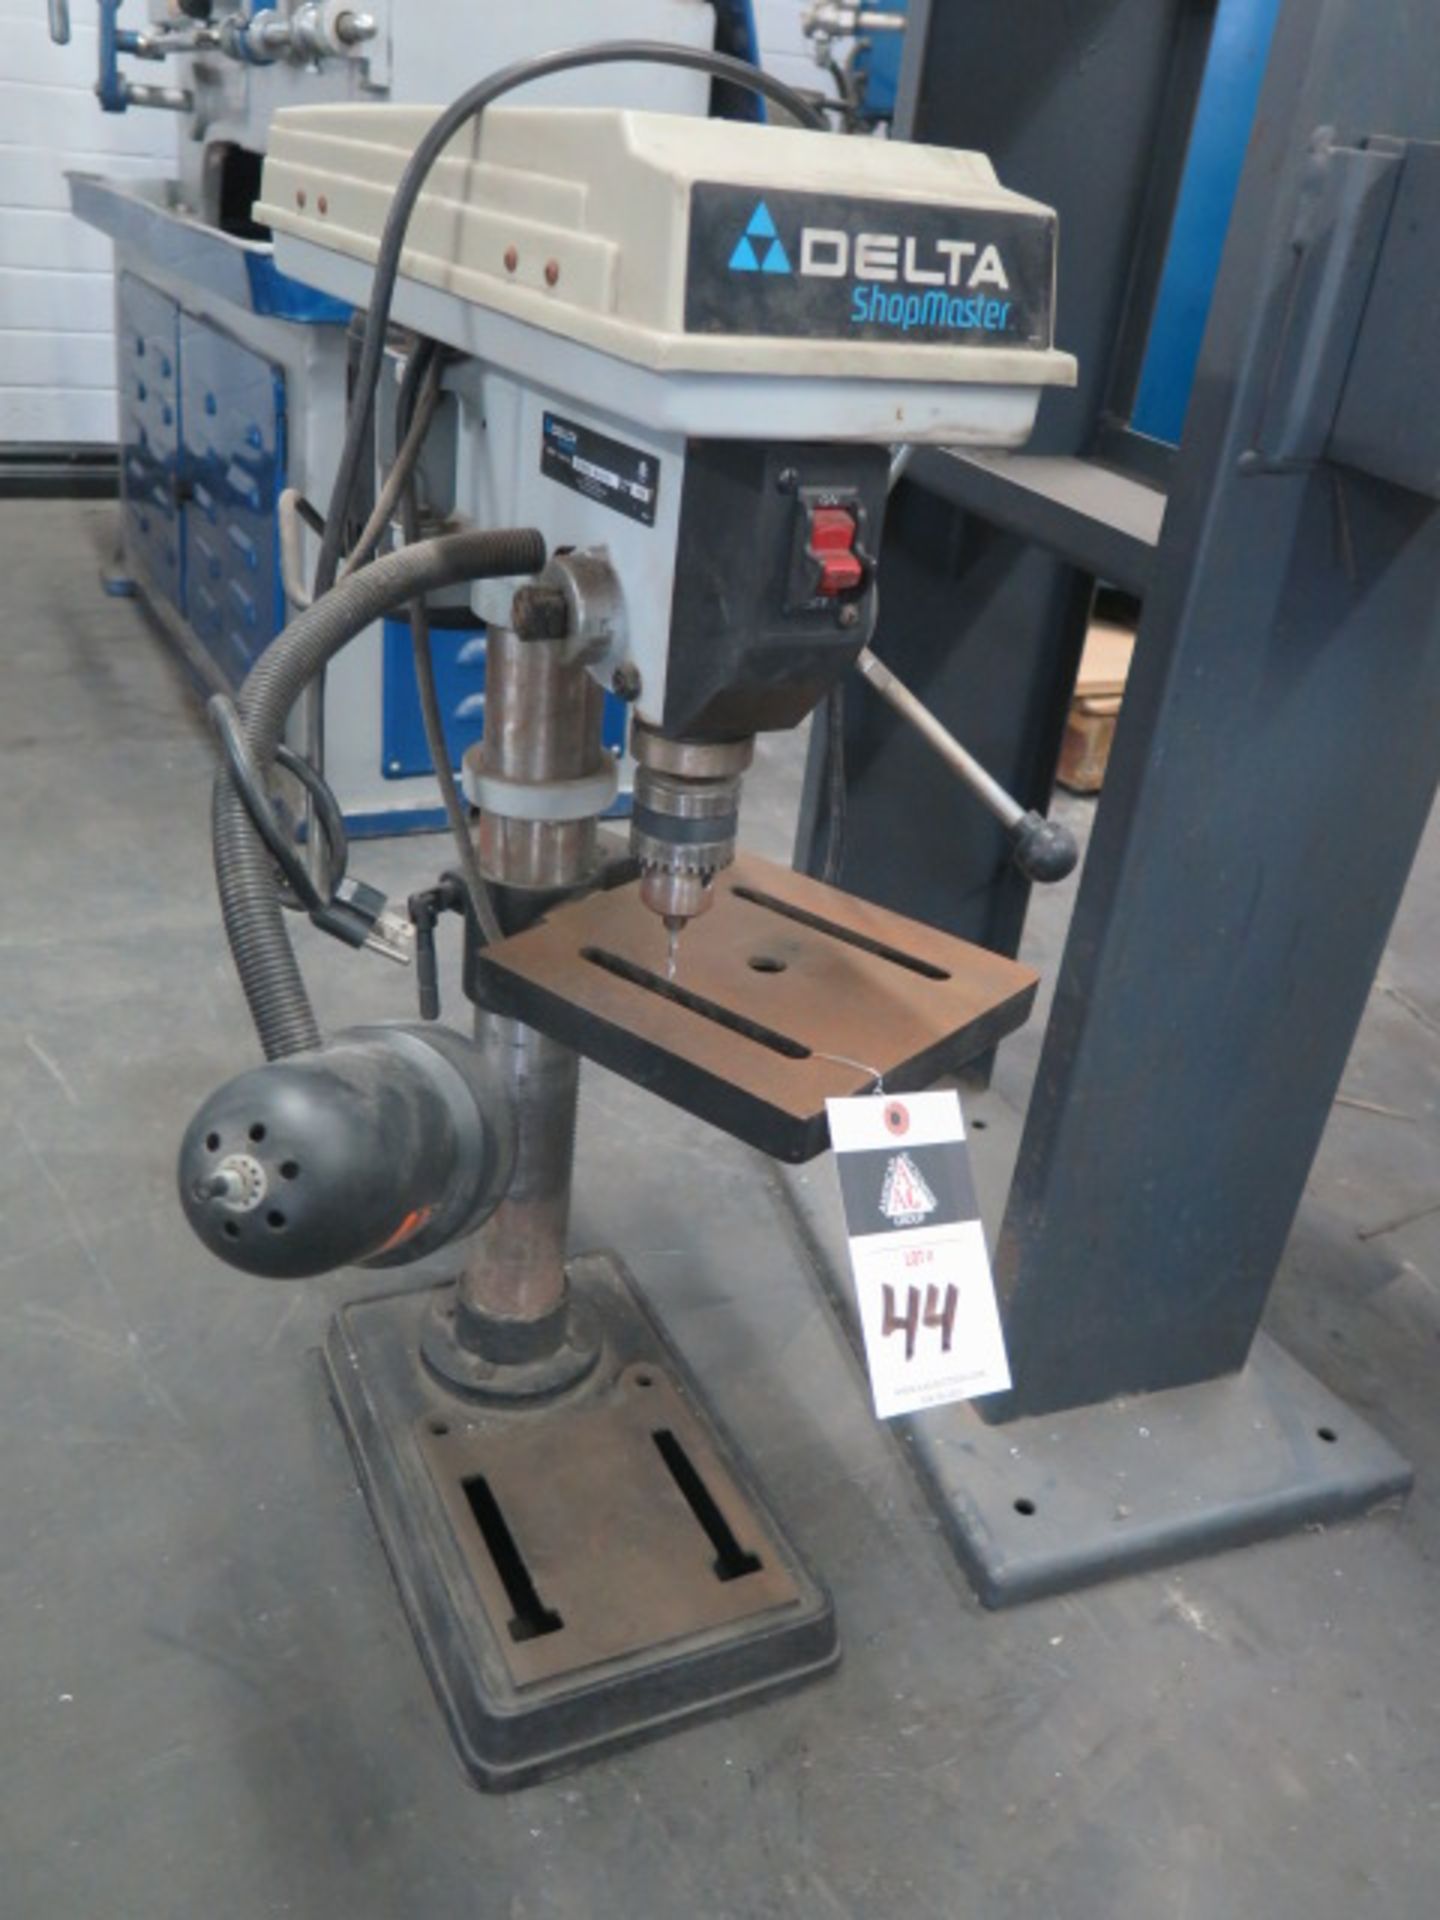 Delta Shopmaster Bench Model Drill Press, Sold AS IS with NO Warranty